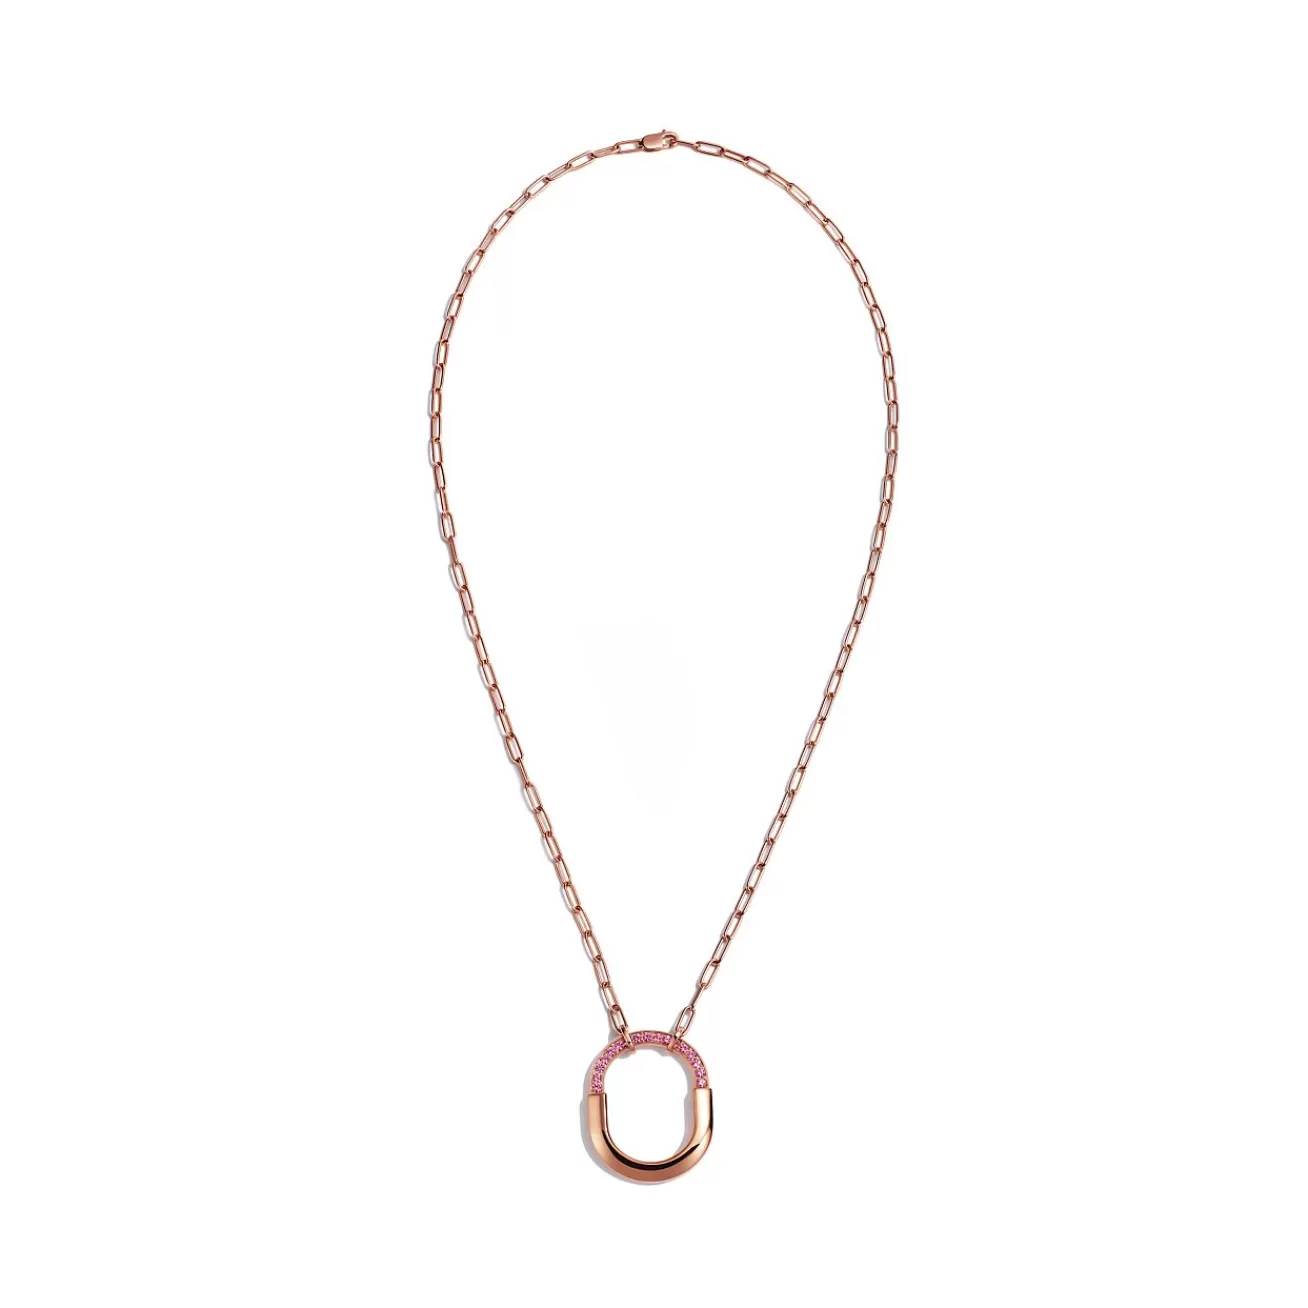 Tiffany & Co. Tiffany Lock Medium Pendant in Rose Gold with Pink Sapphires | ^ Necklaces & Pendants | New Jewelry